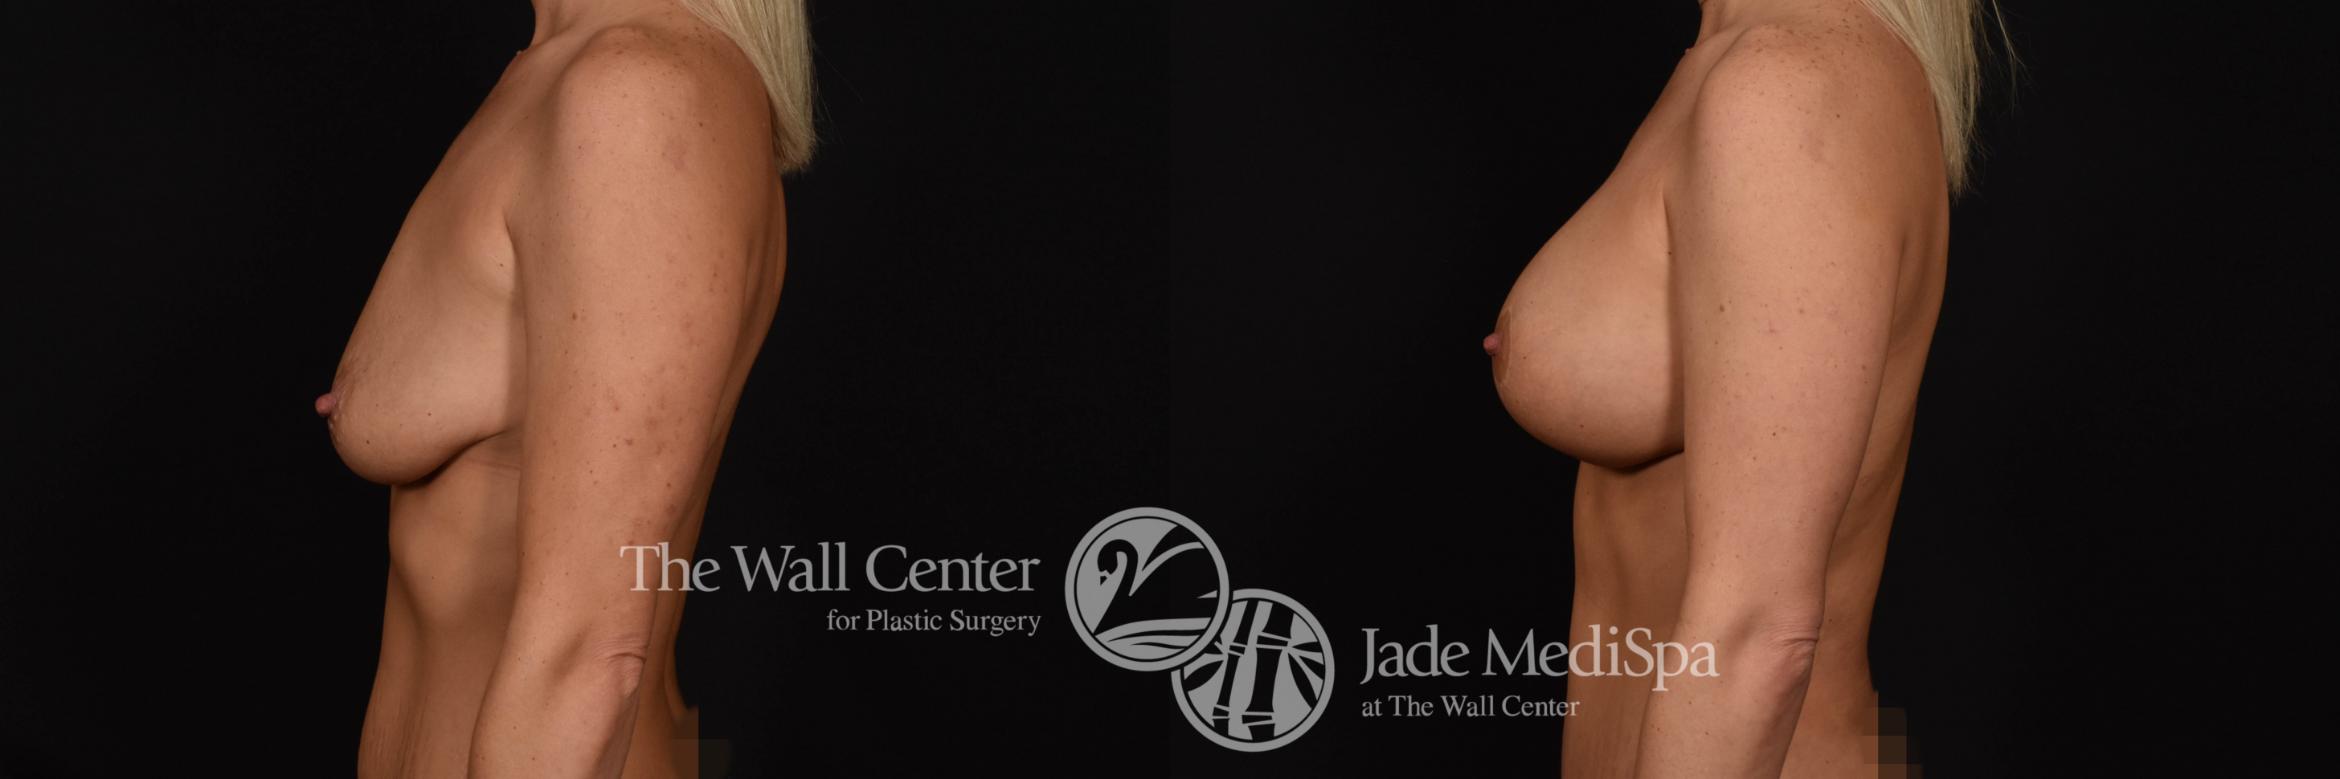 Breast Aug with Lift, Left Side Photo, Shreveport, Louisiana, The Wall Center for Plastic Surgery, Case 926